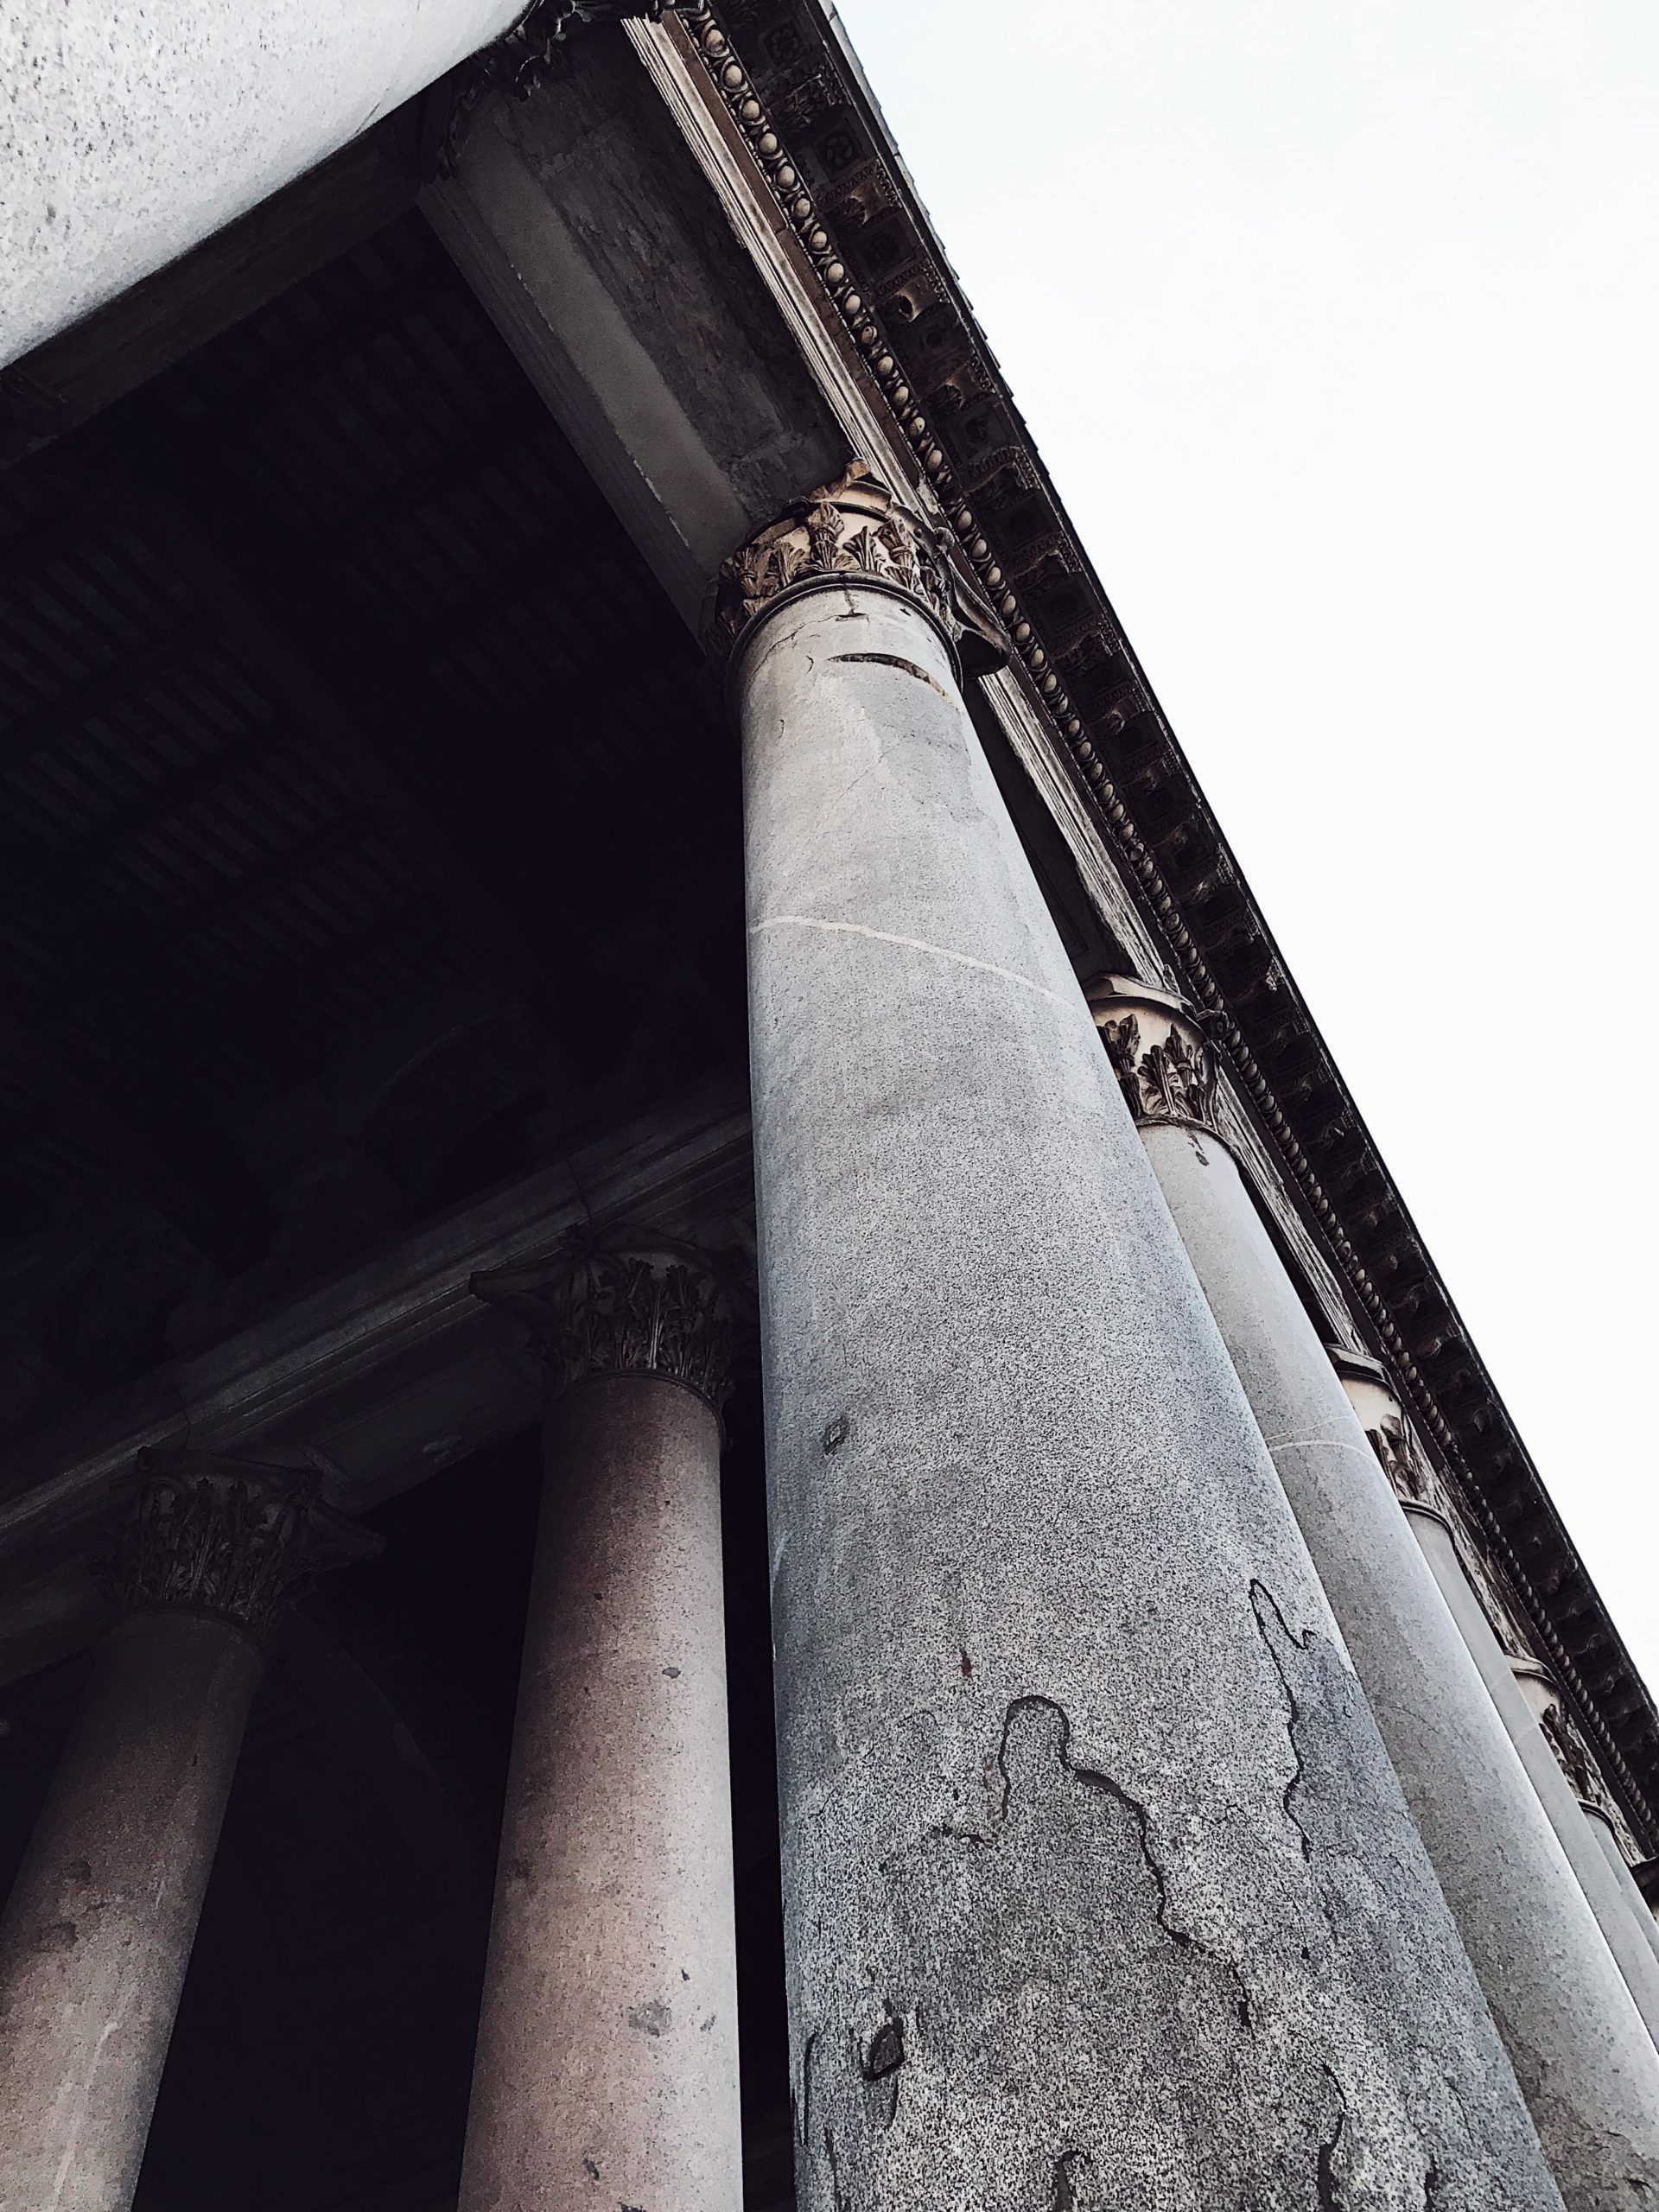 Rome in pictures: pantheon's columns